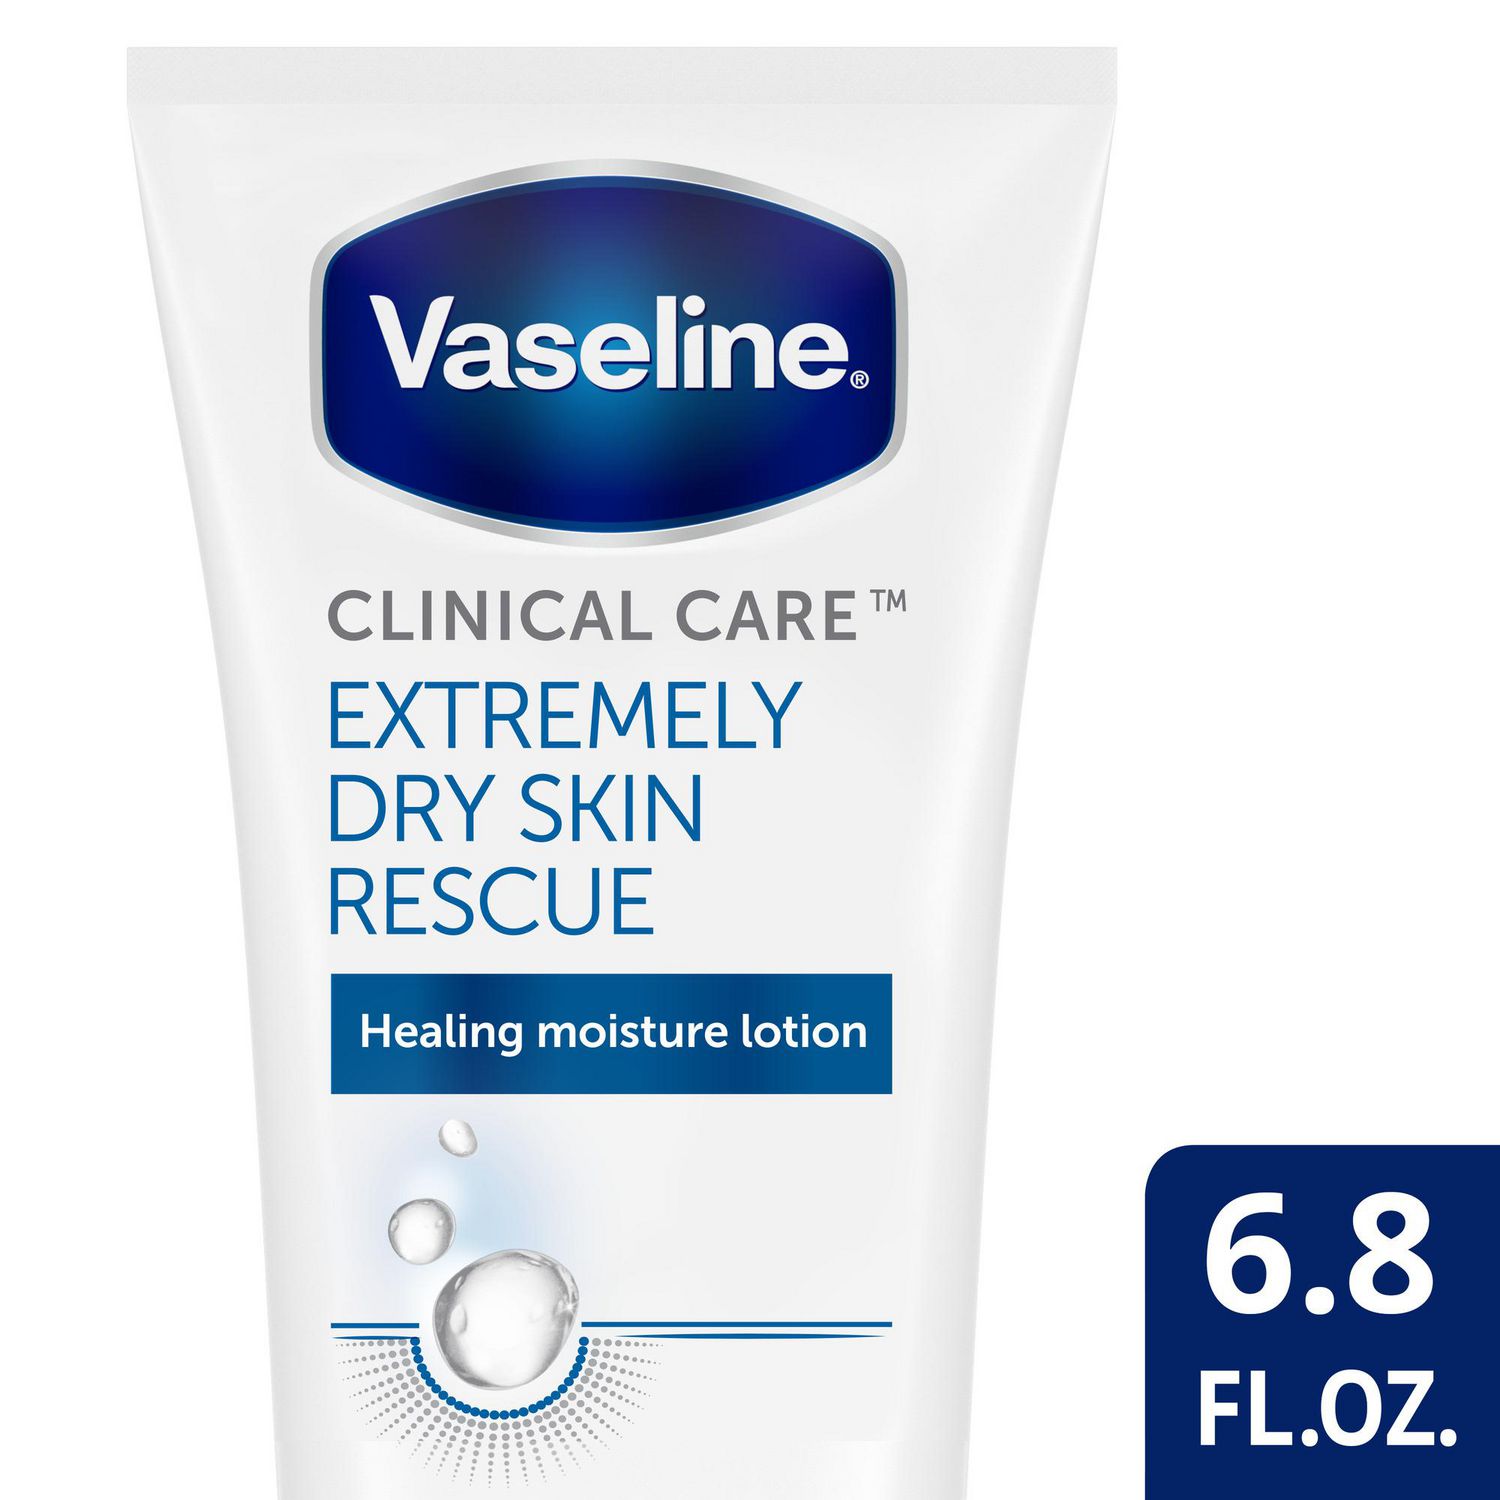 Vaseline Clinical Care Extremely Dry Skin Rescue Lotion Walmart Canada